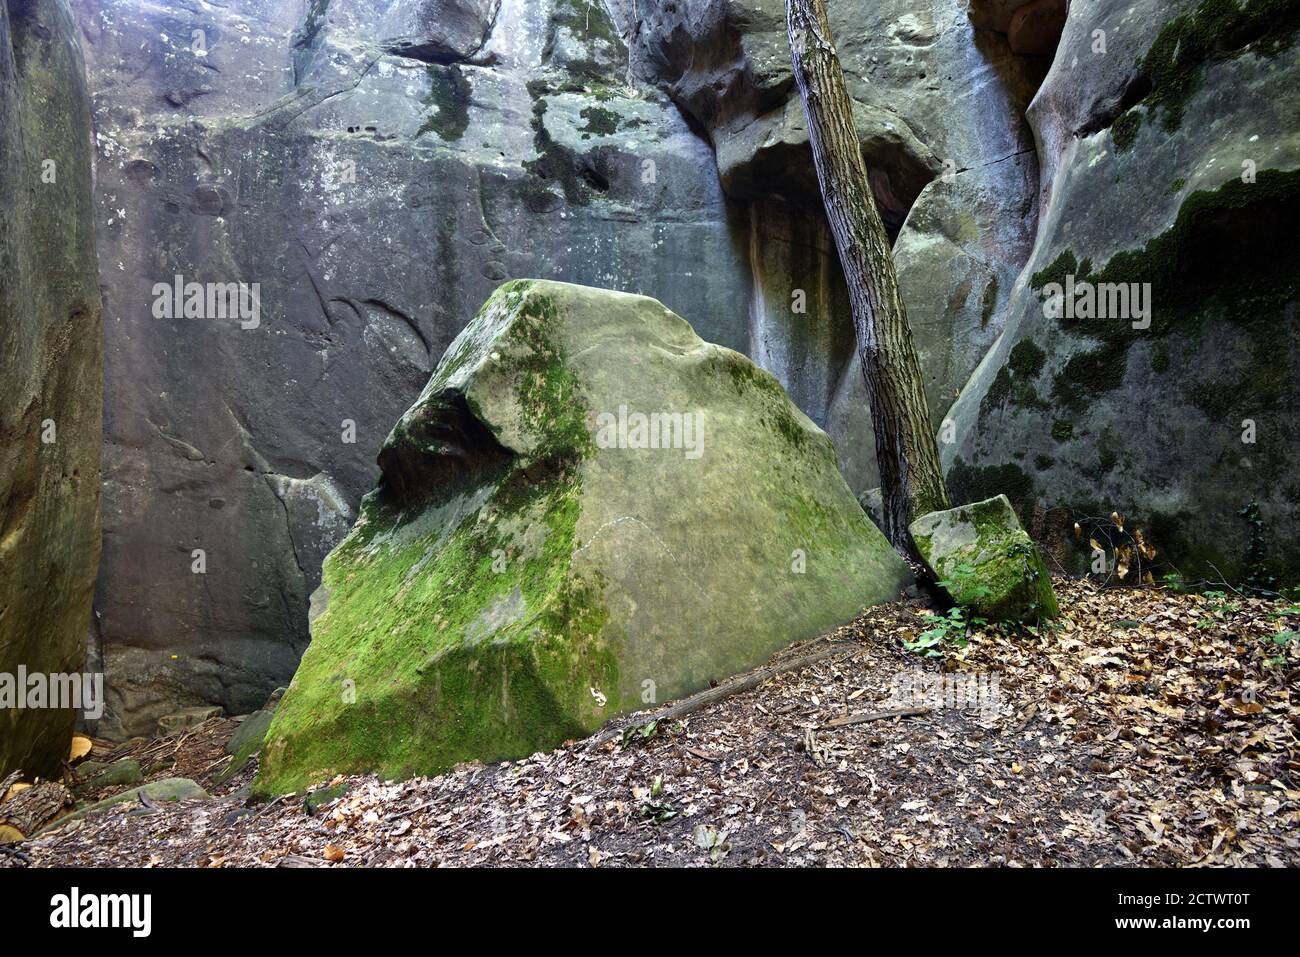 Moss-Covered Boulder in Rocky Gorge known as Le Jardin du Roi, the King's Garden, Among the Sandstone Outcrops of Annot Alpes-de-Haute-Provence France Stock Photo